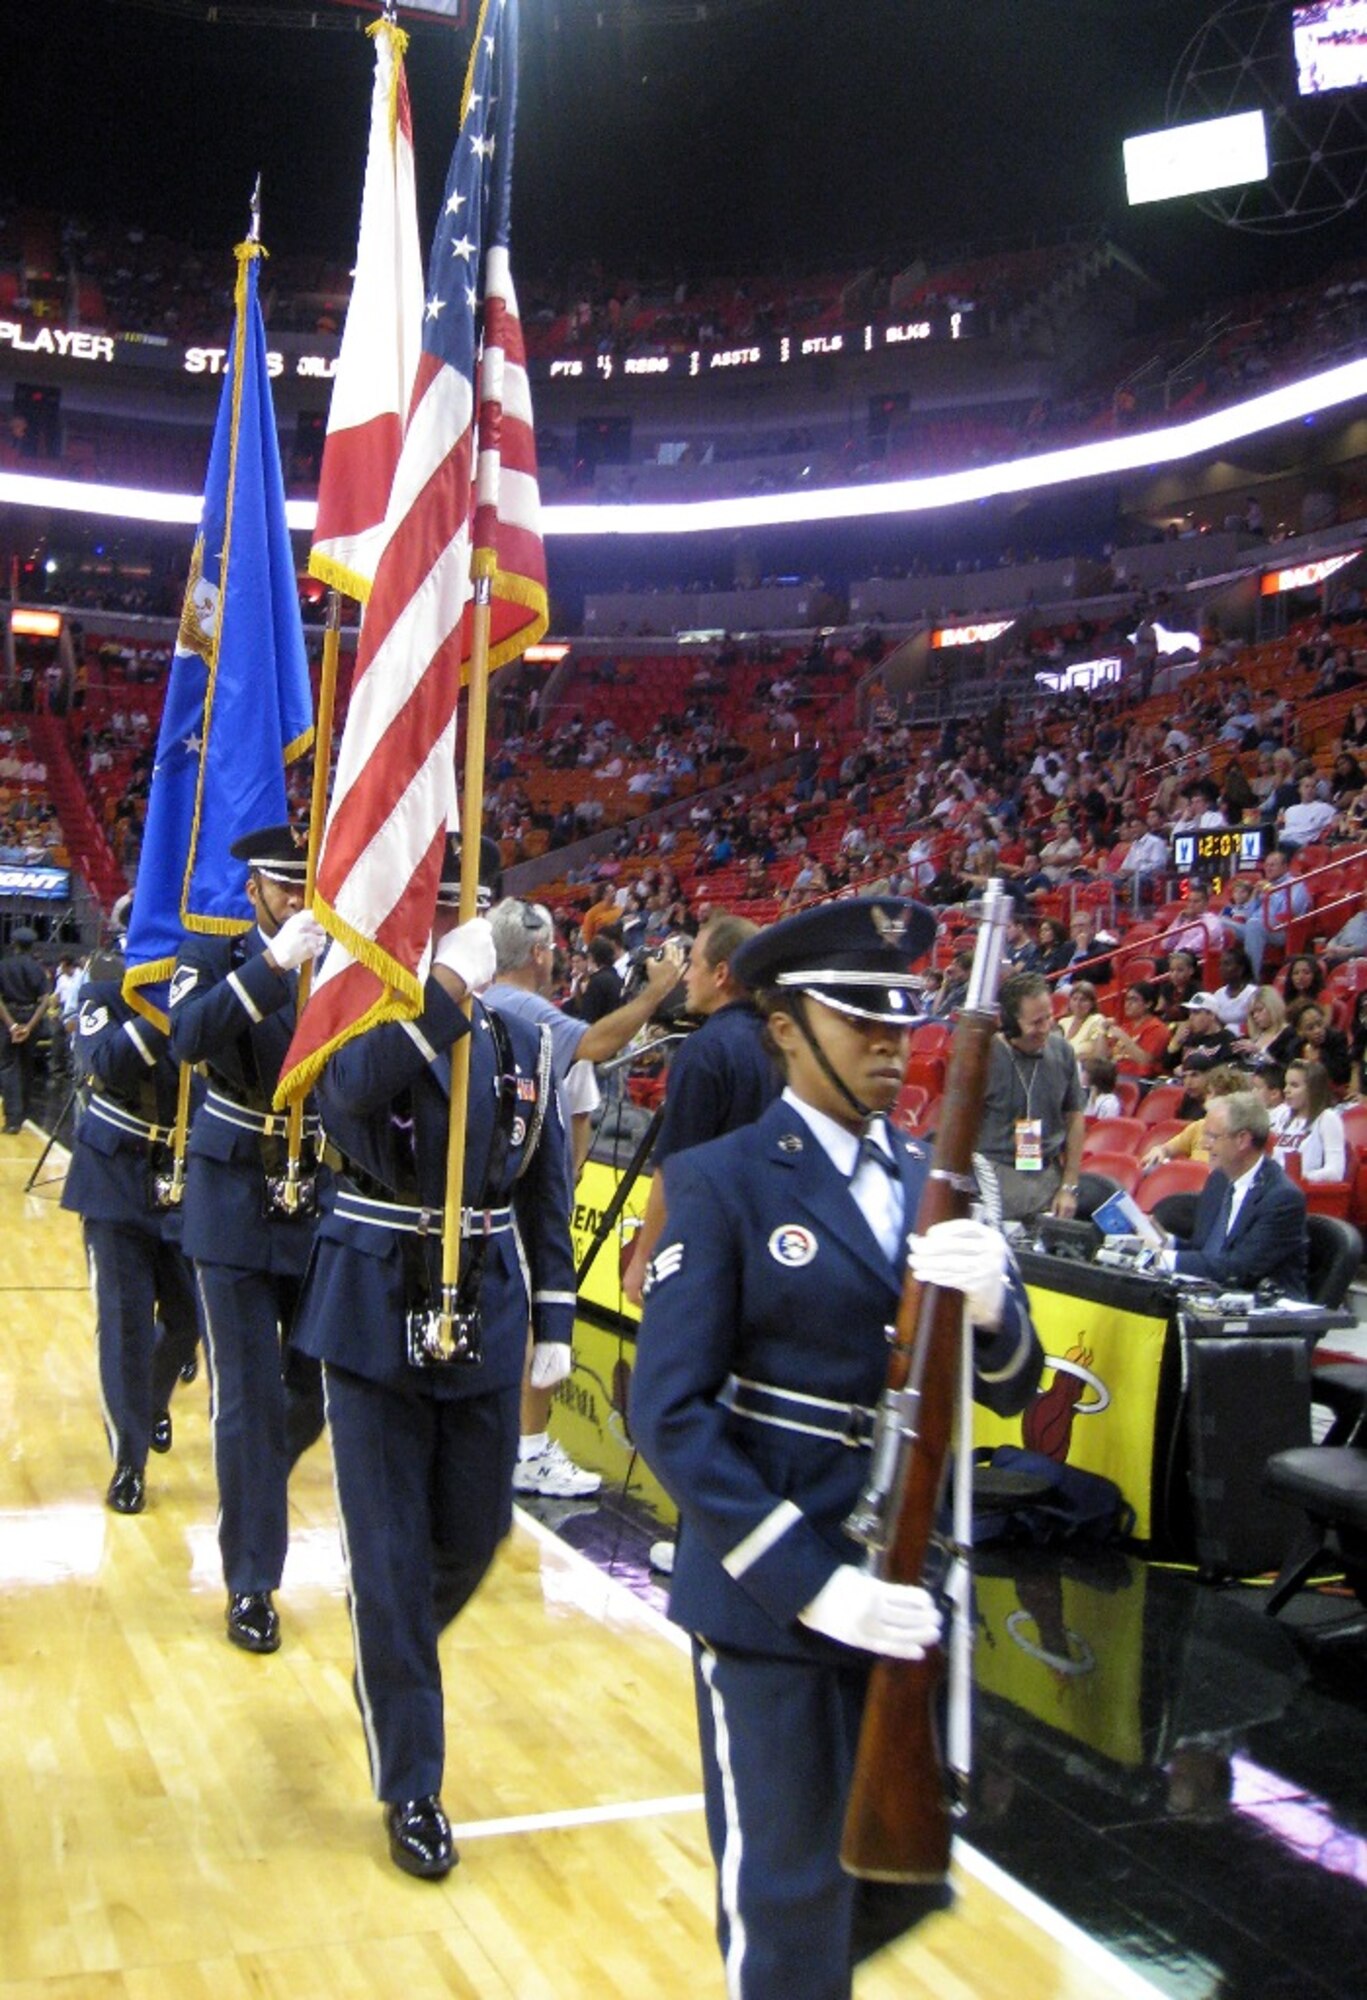 The 482nd Fighter Wing Honor Guard exits the court at American Airlines Arena after presenting the colors at the “Air Force Reserve Night” during the Miami Heat game on March 14. The first-ever event, spearheaded by the 482nd Fighter Wing’s Recruiting Office, also featured a mass enlistment during halftime, and reservists volunteering at four informational kiosks scattered around the arena to help raise awareness about the Reserve. (U.S. Air Force photo/Staff Sgt. Leo Castellano)